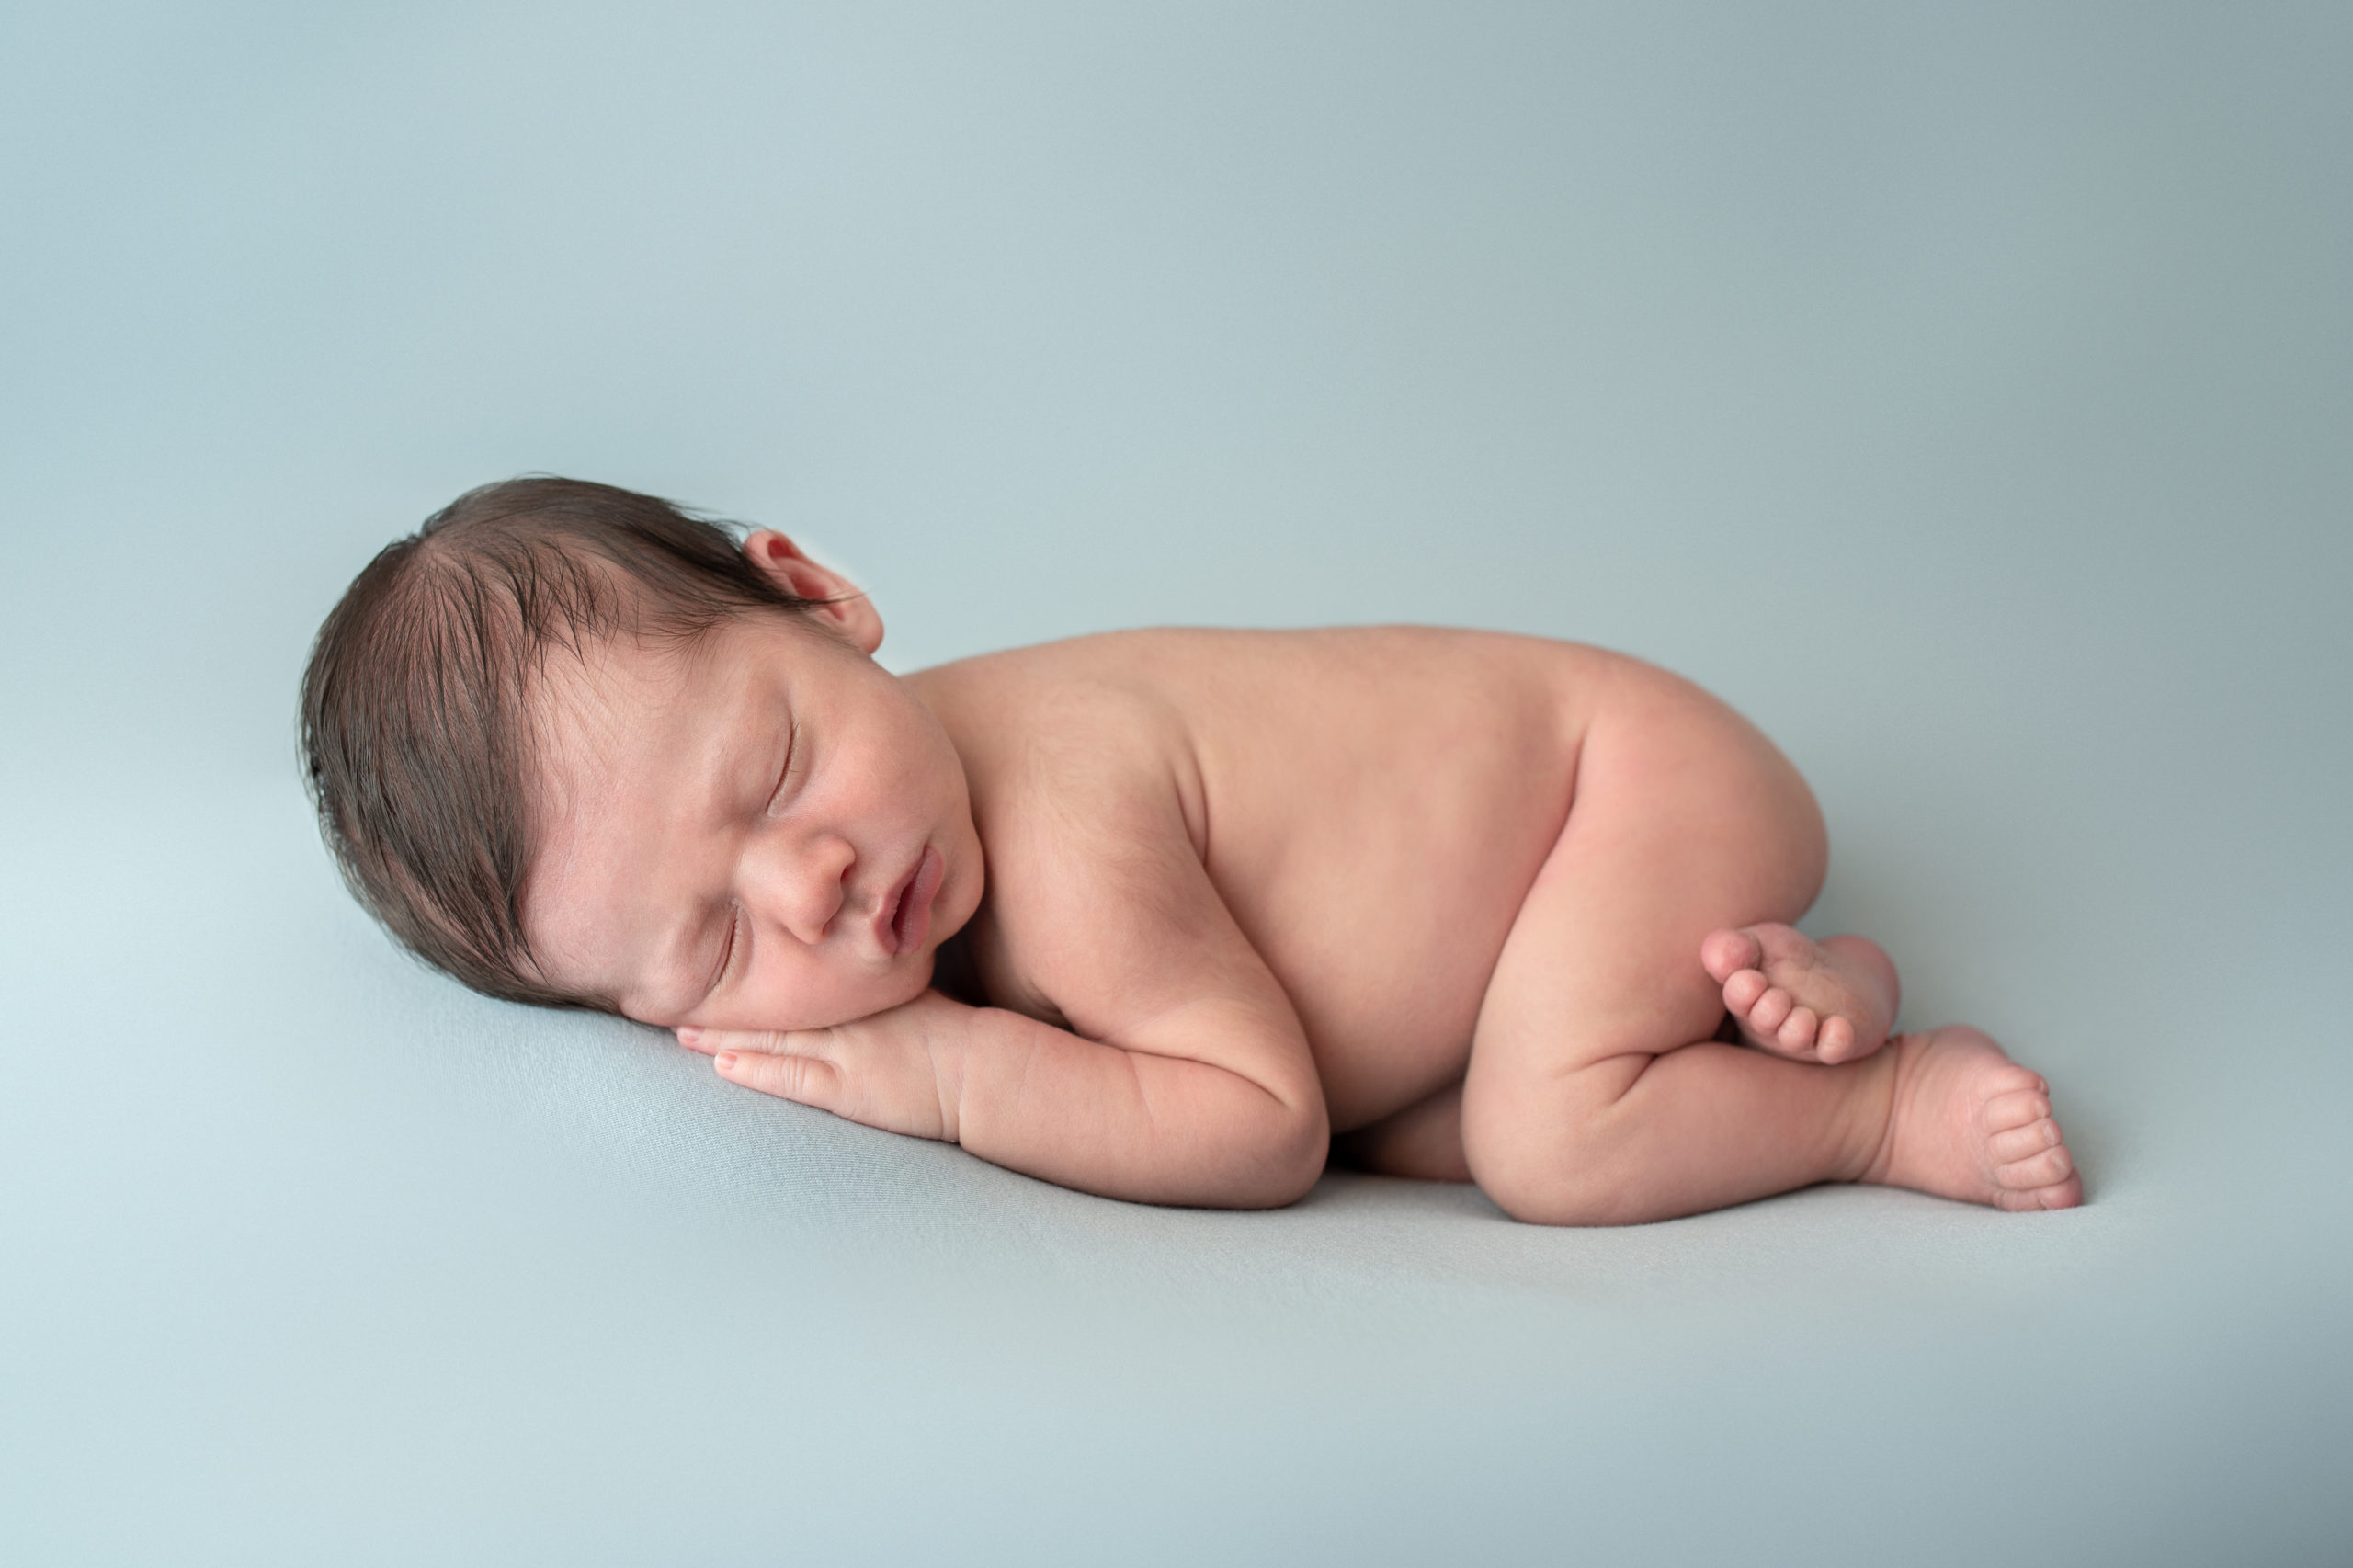 newborn baby without clothes sleeping on it's hands on a blue backdrop